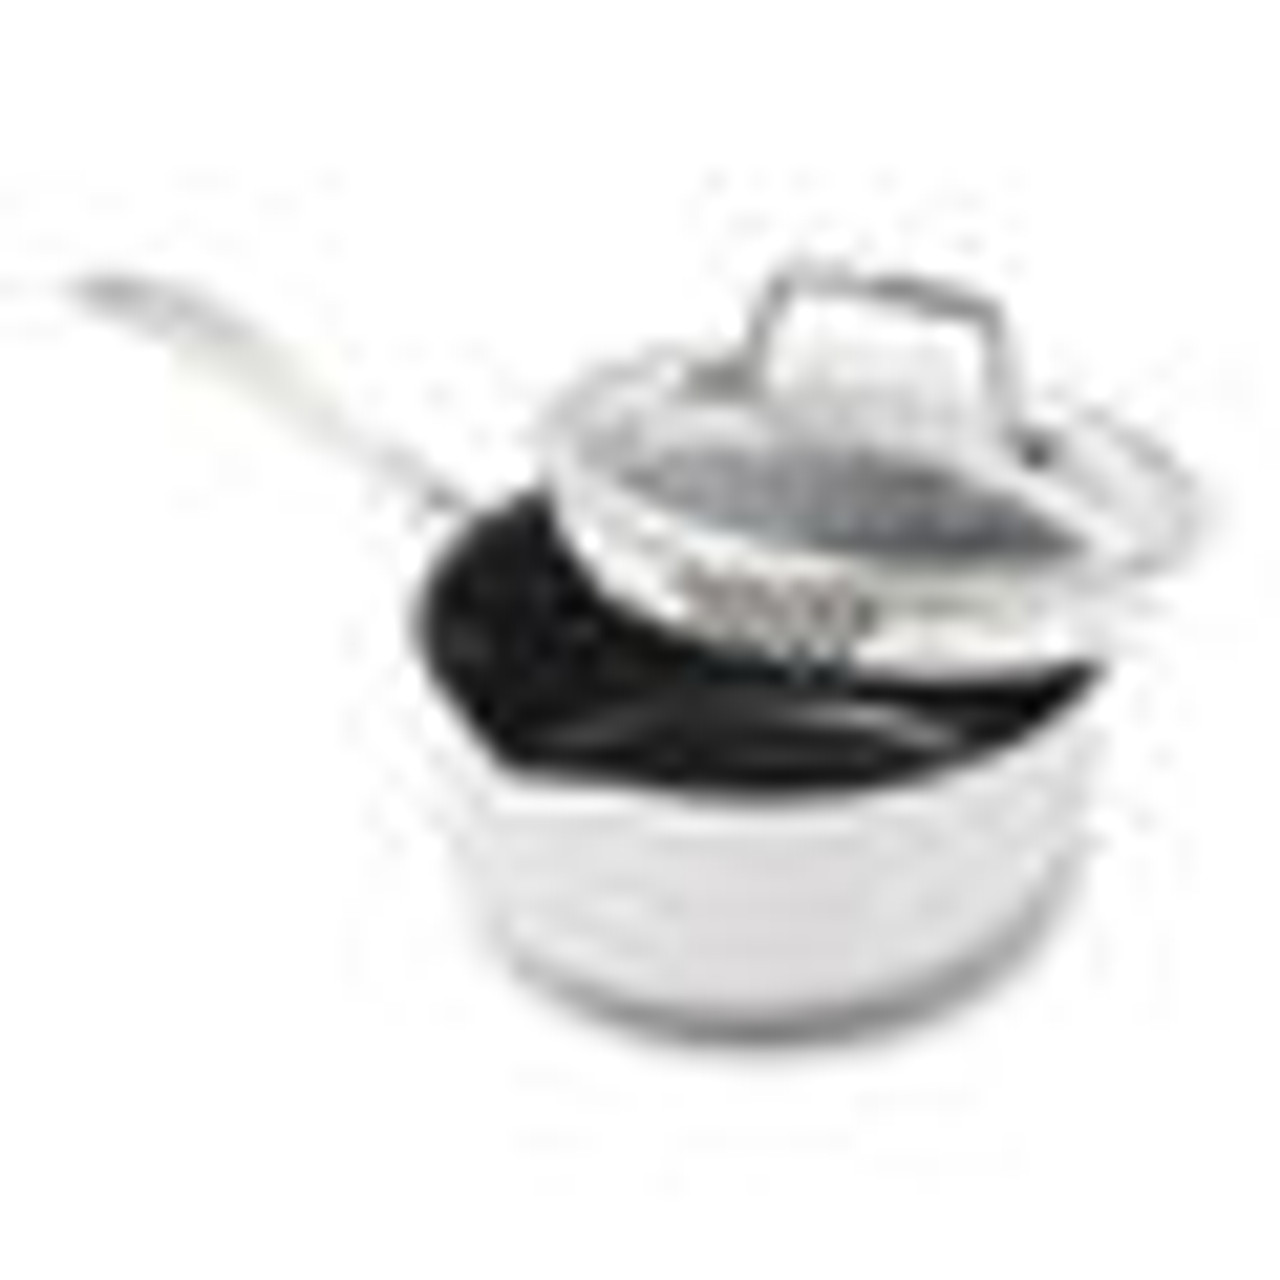 ZWILLING J.A. Henckels Clad Xtreme 3-Qt. Ceramic Saucepan with Lid +  Reviews